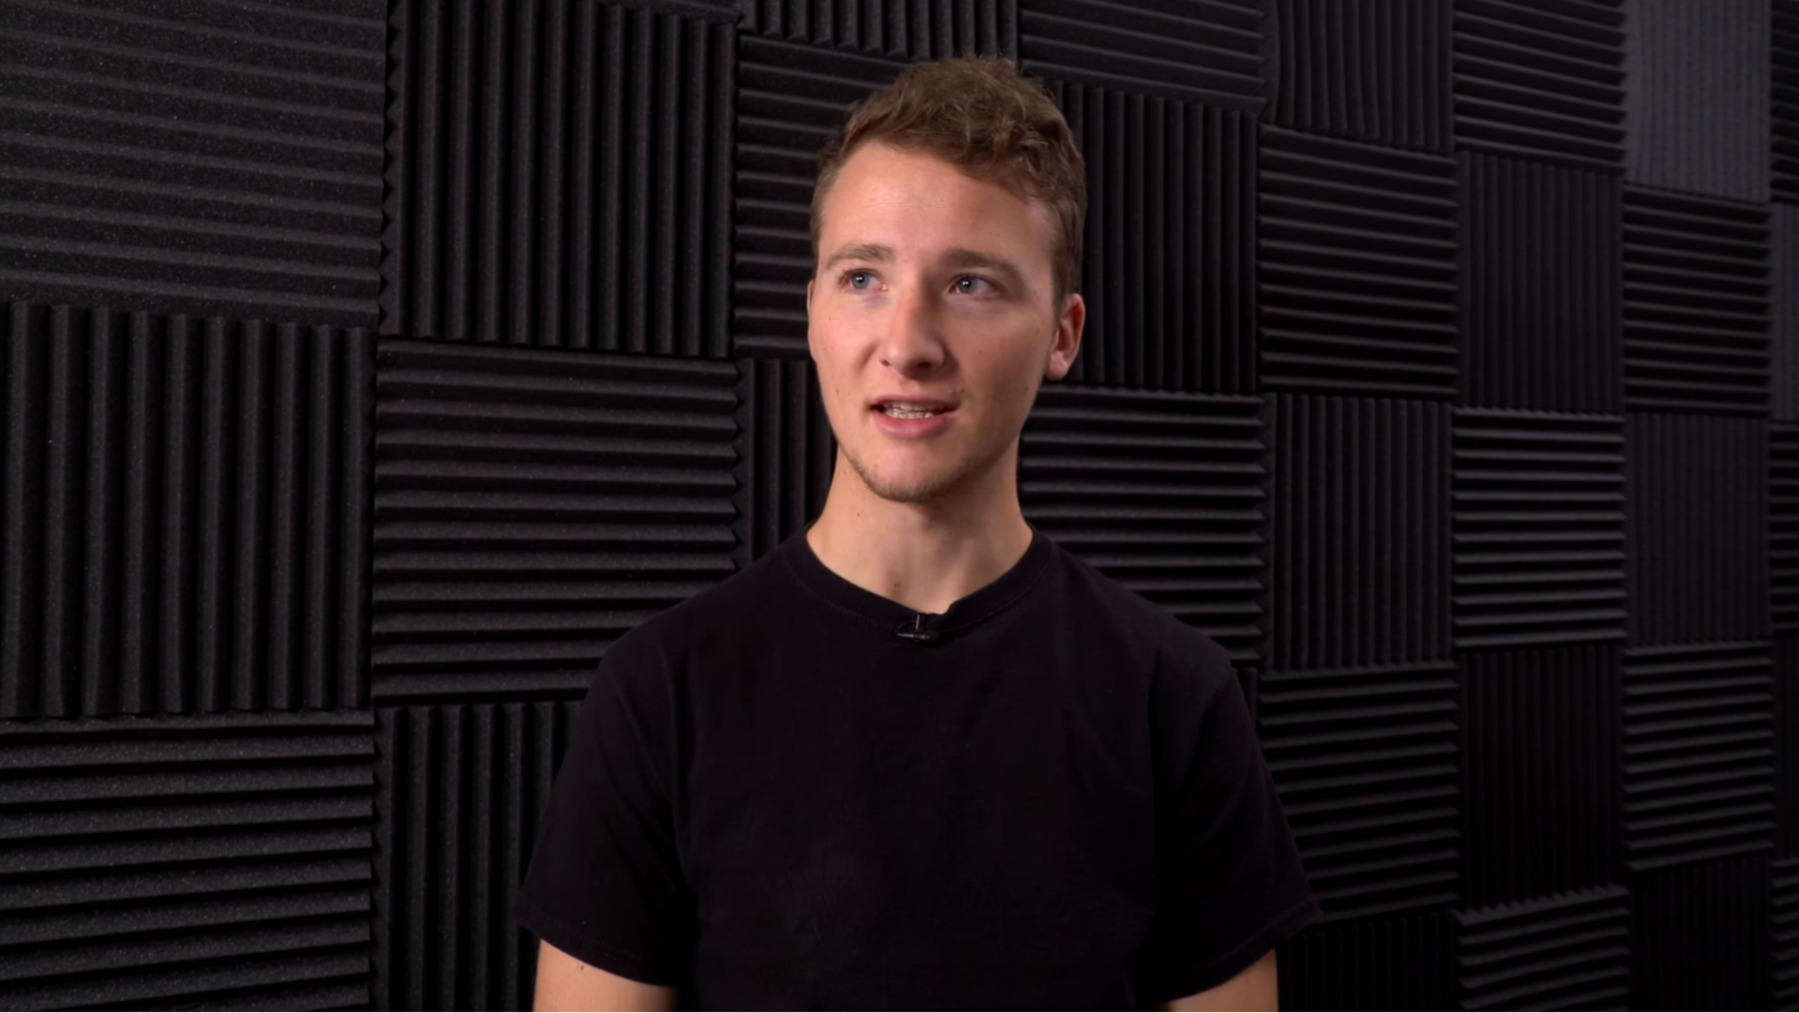 video recording studio - image of a men, that's an example of acoustic foam panels as background